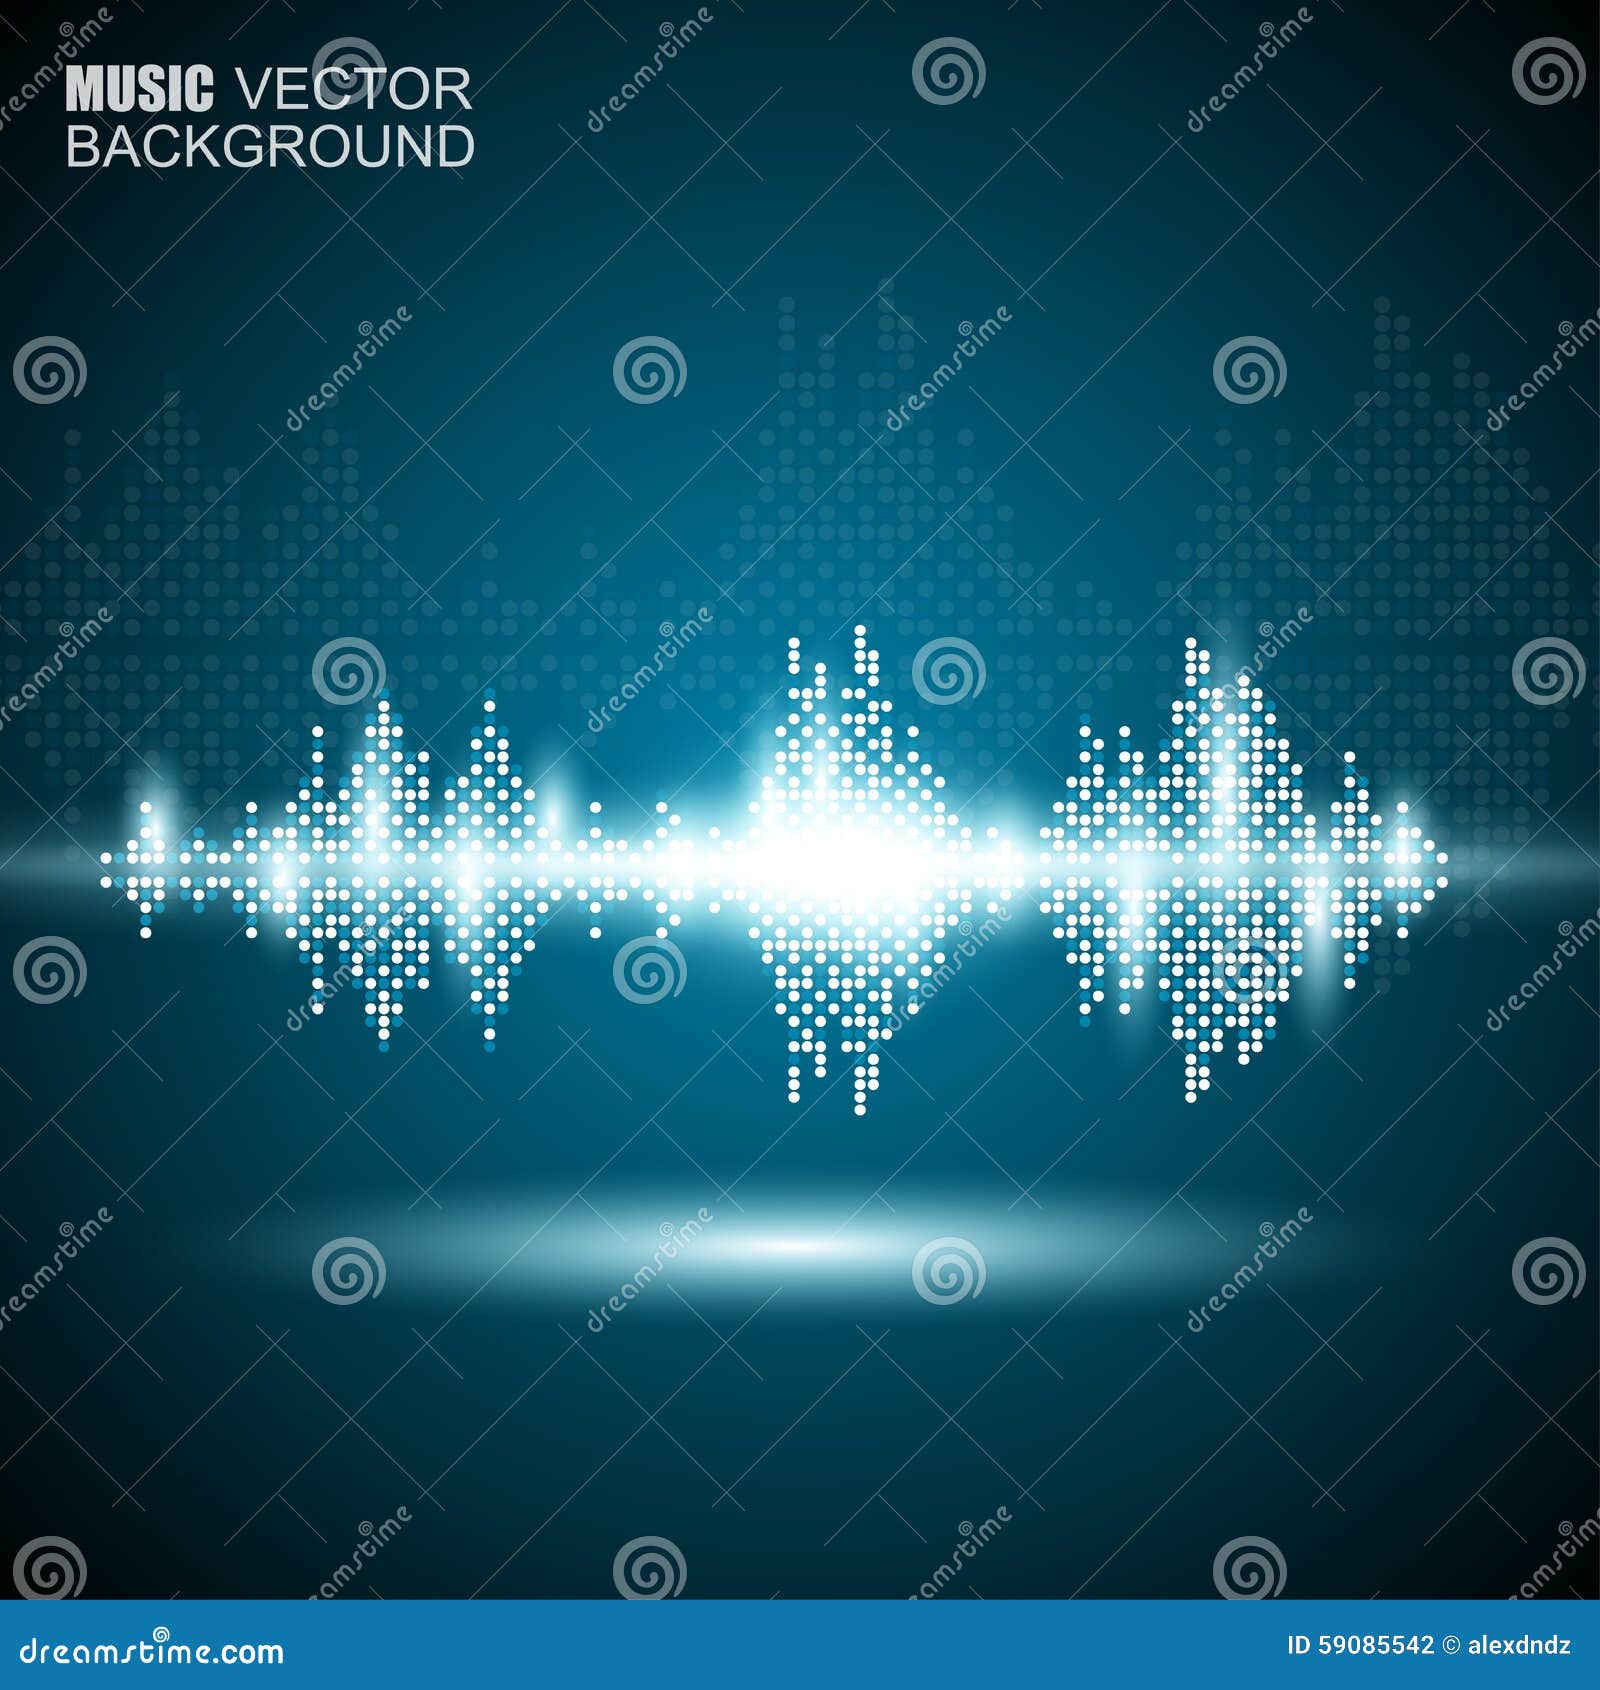 Abstract Music Waves Background Stock Vector - Illustration of pulse